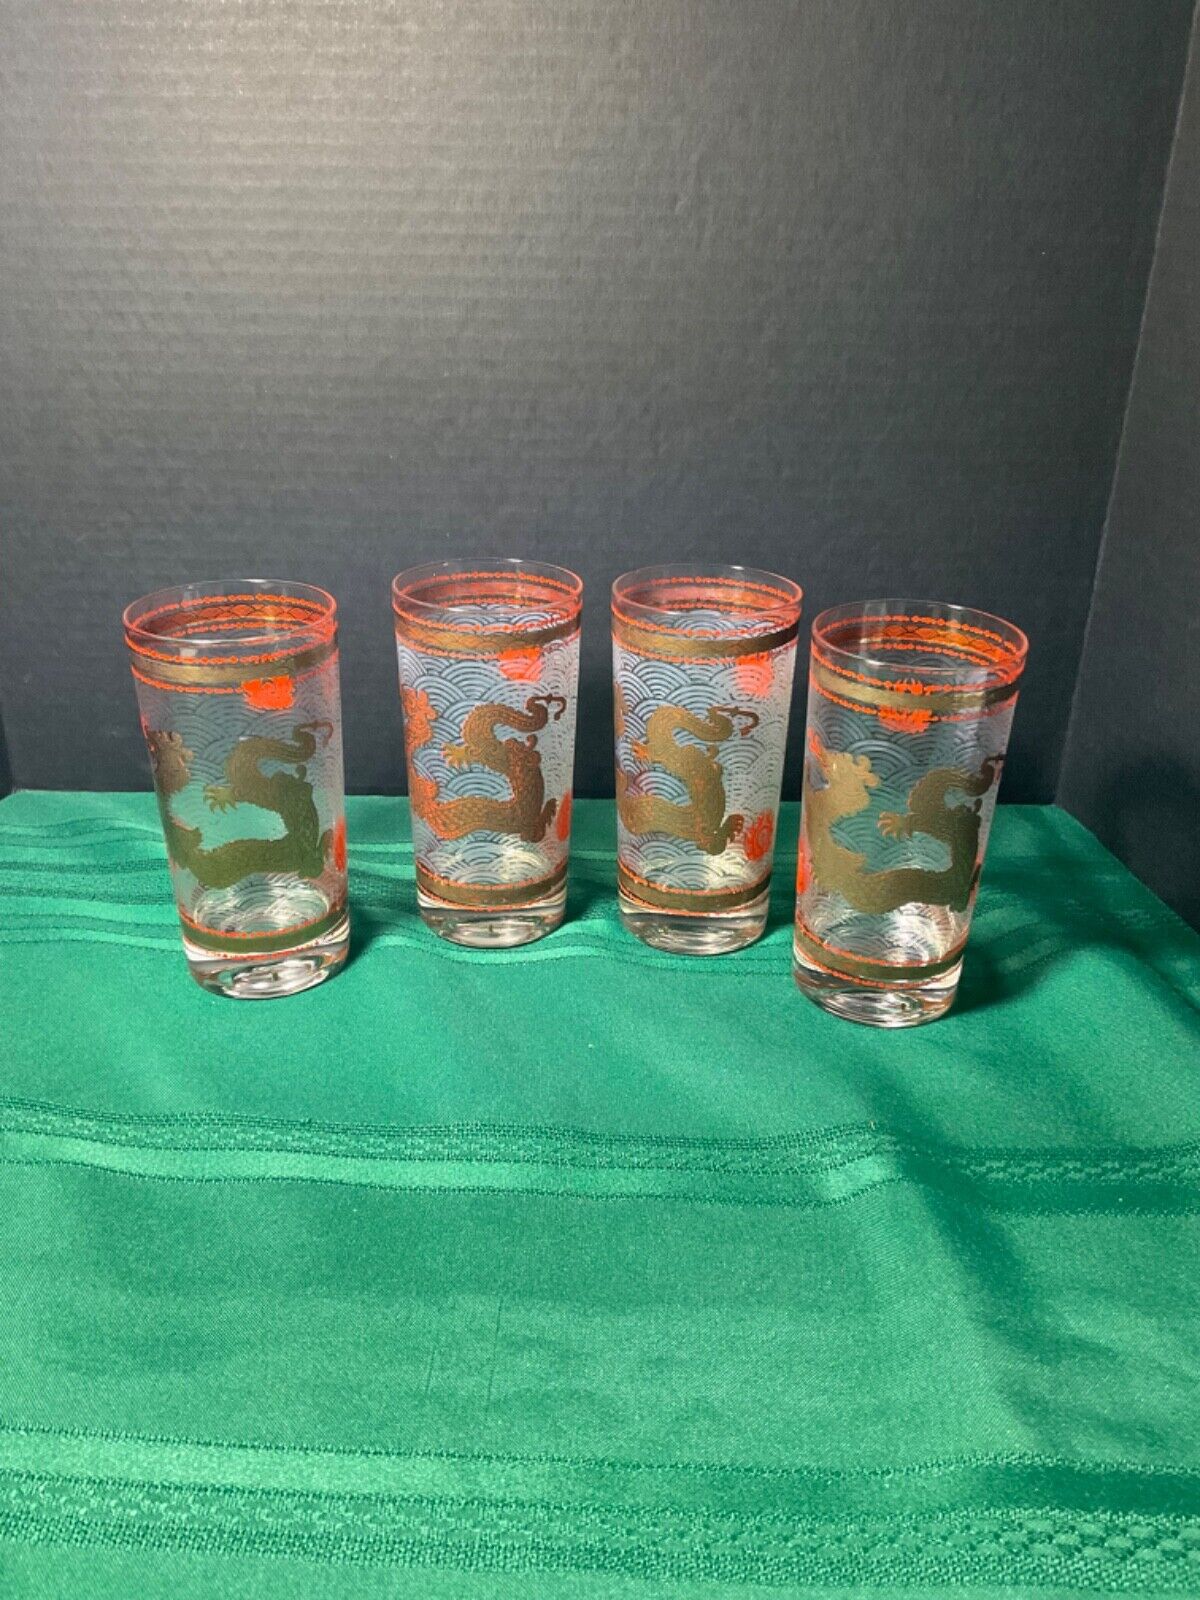 4x RARE Vintage 60s Chinese New Year GOLDEN DRAGON Highball Drinking Glasses WOW